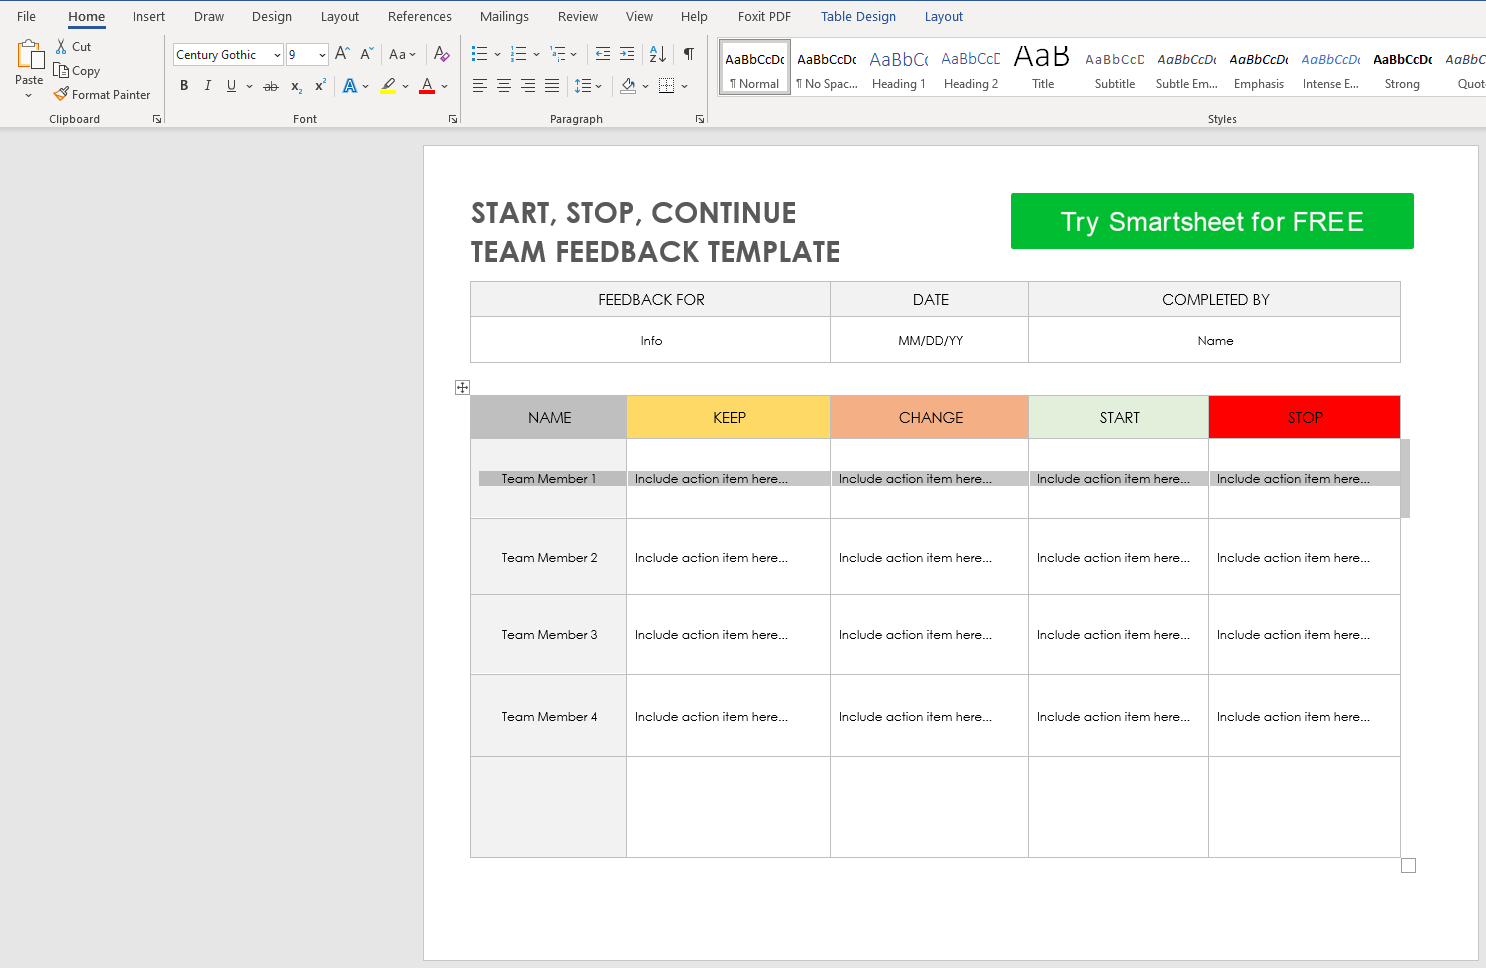 Start Stop Continue template from Smartsheet